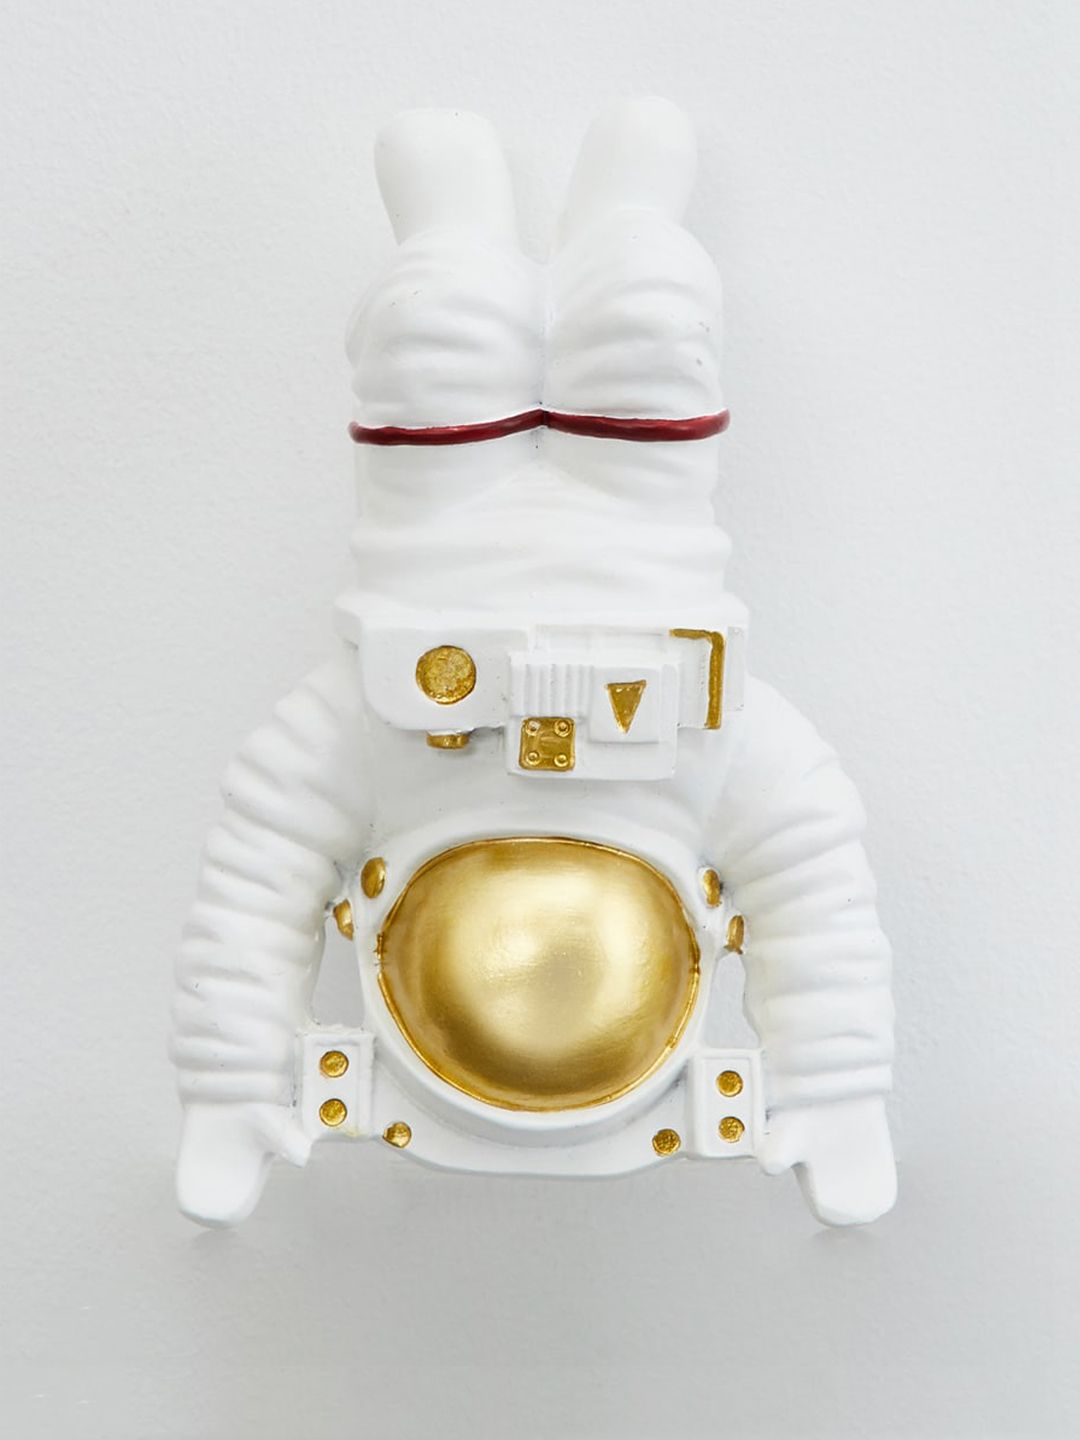 Home Centre Souvenir Polyresin Downward Astronaut Wall Hanging Figurine Price in India